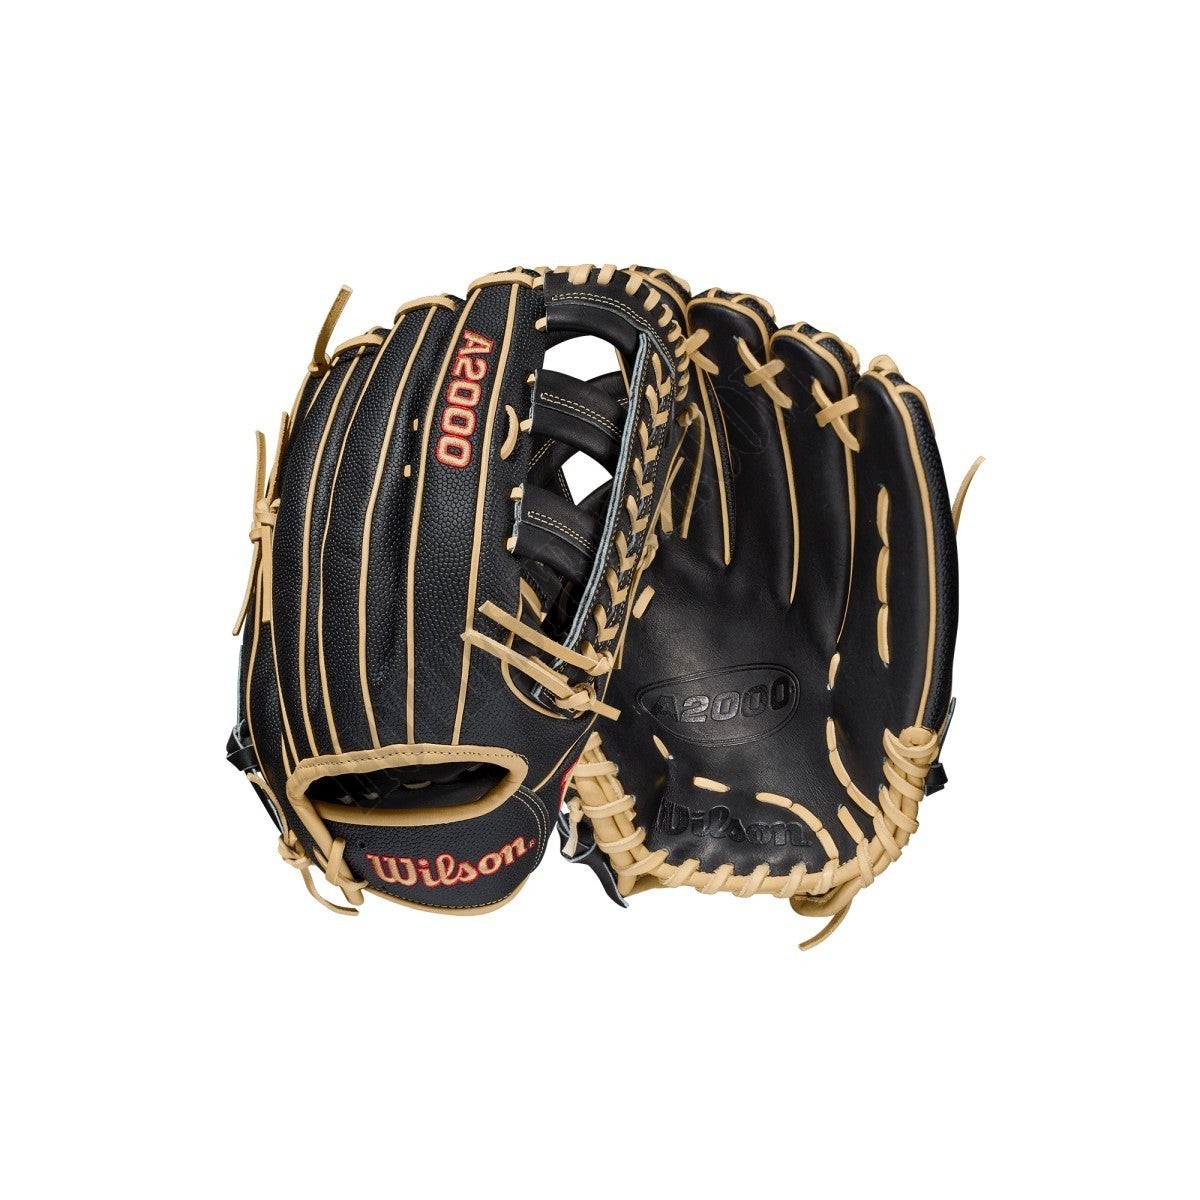 2021 A2000 1800SS 12.75" Outfield Baseball Glove ● Wilson Promotions - -0